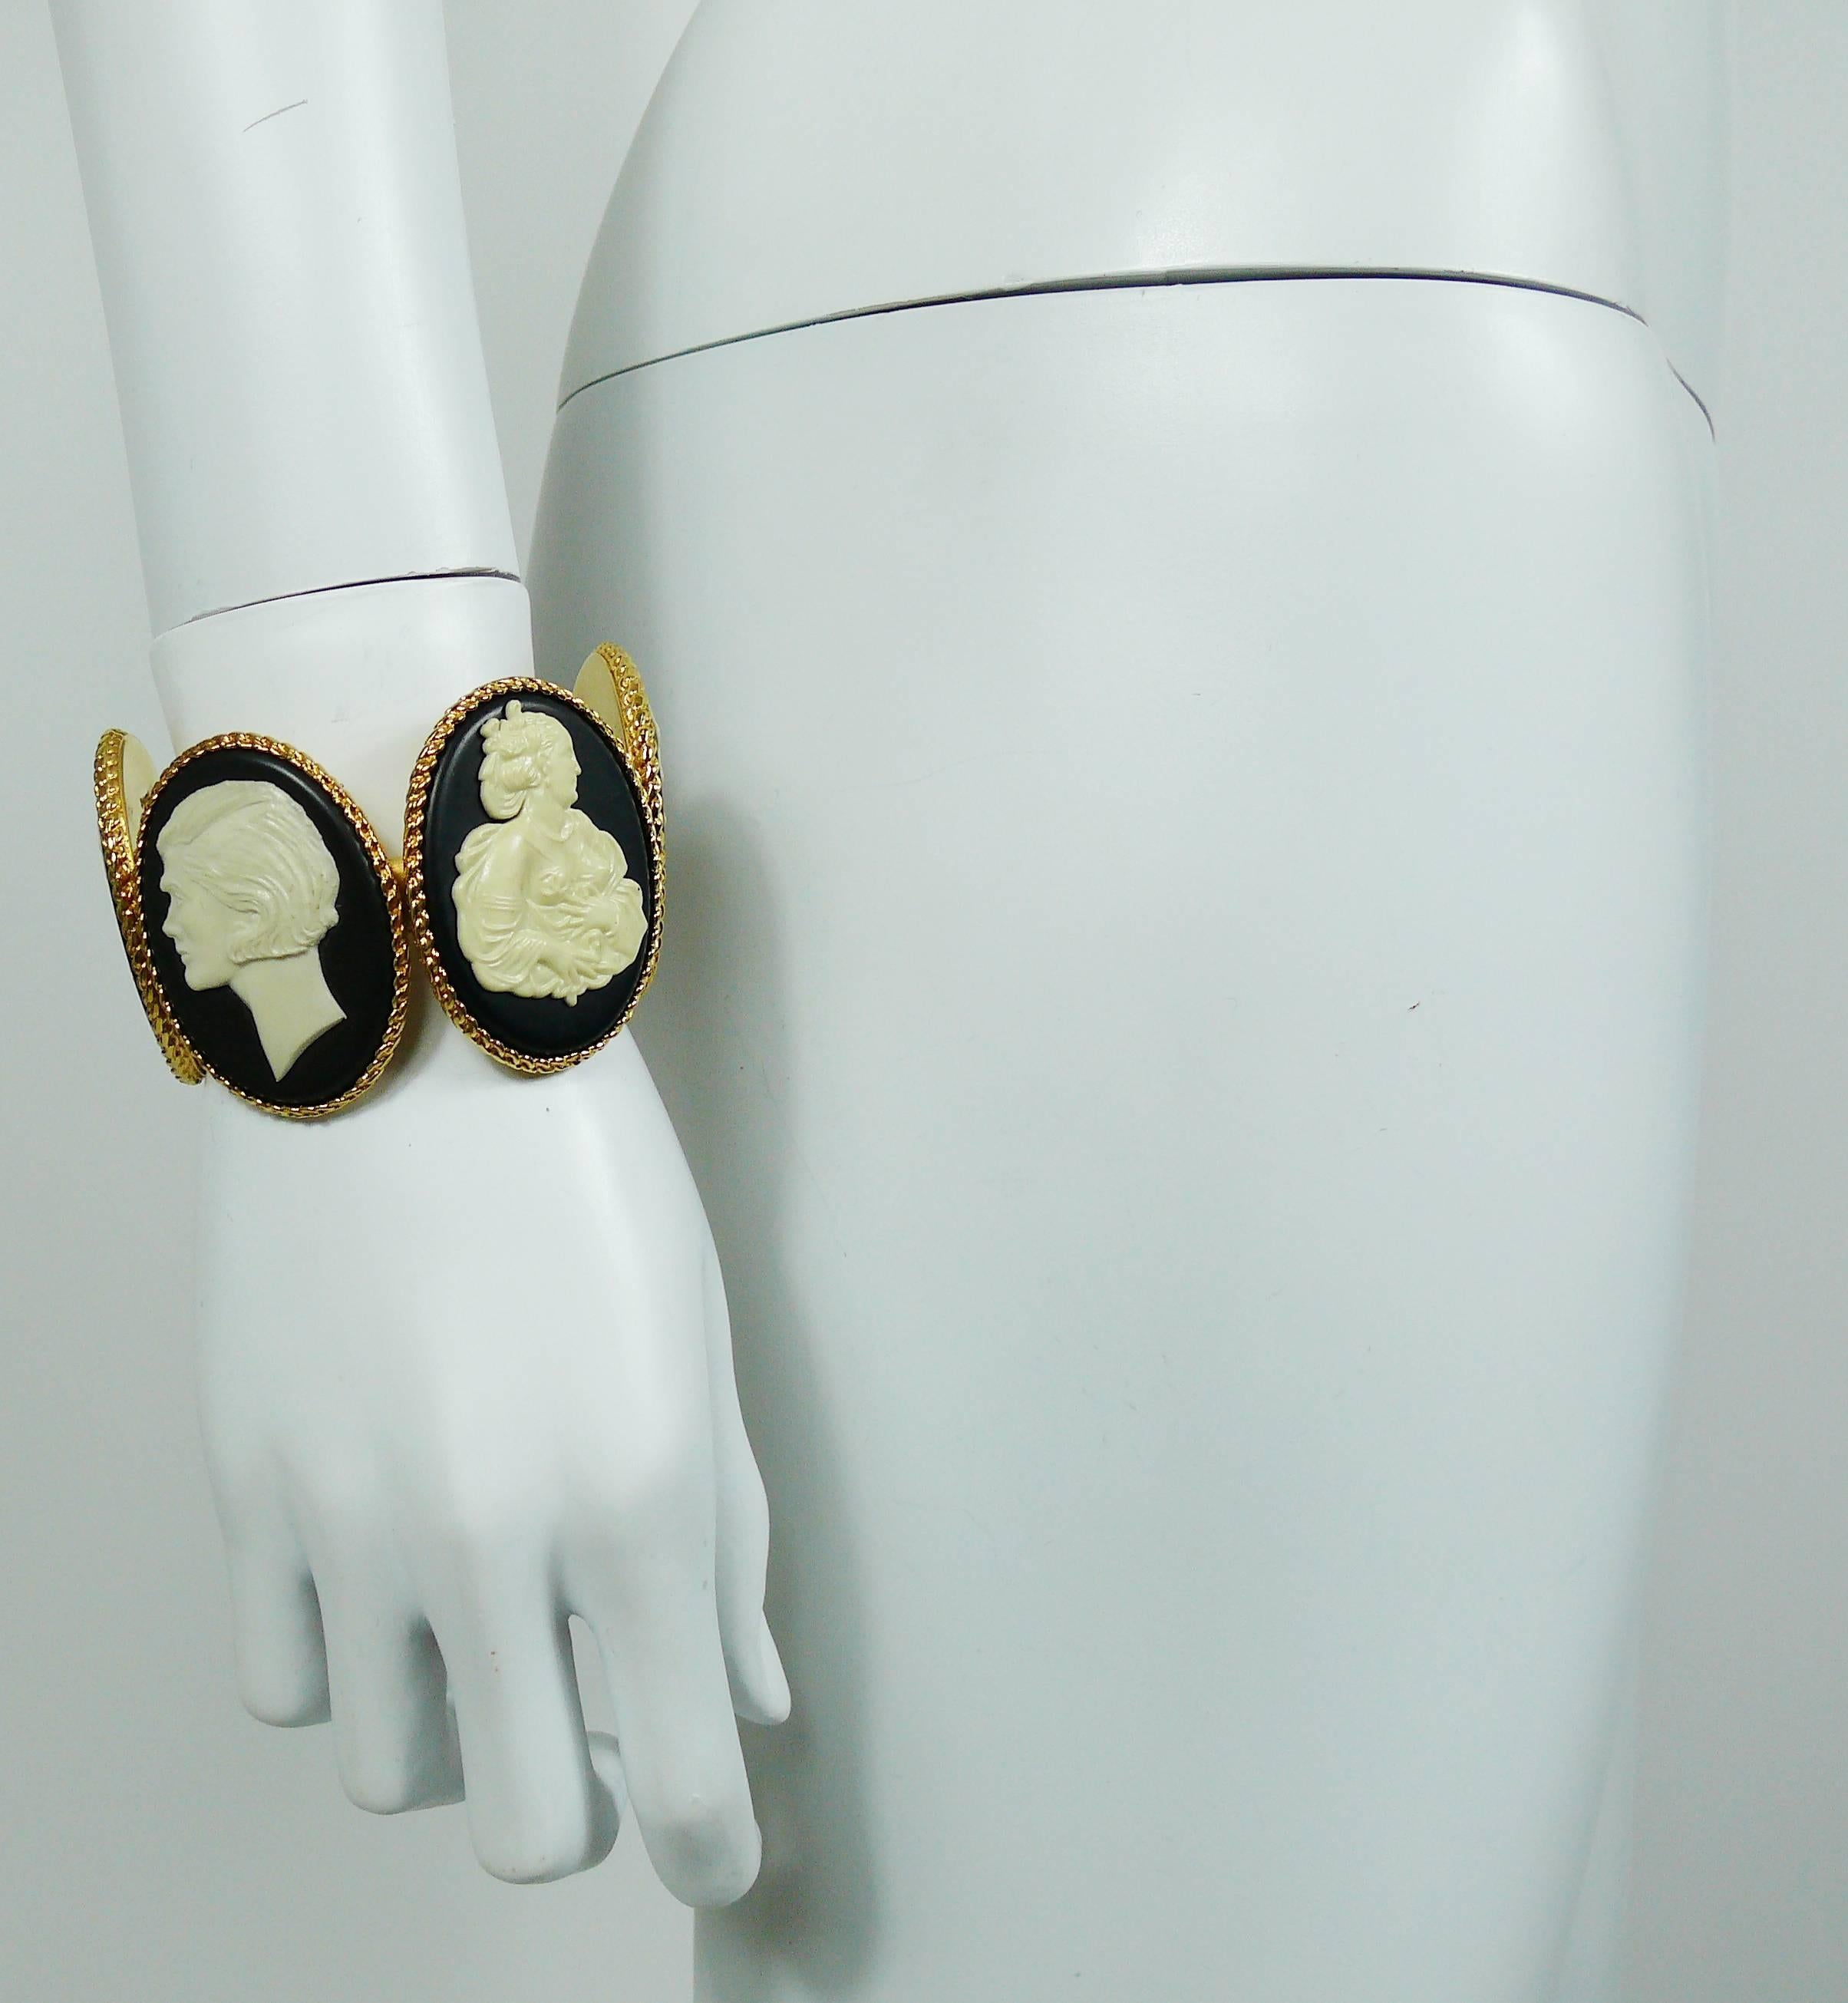 CHANEL vintage uber rare cuff bracelet featuring four large size resin oval cameos (off-white on a black background) in a gold toned setting.

Two cameos feature Mademoiselle CHANEL profile.

A truly collector item, impossible to find !

Embossed